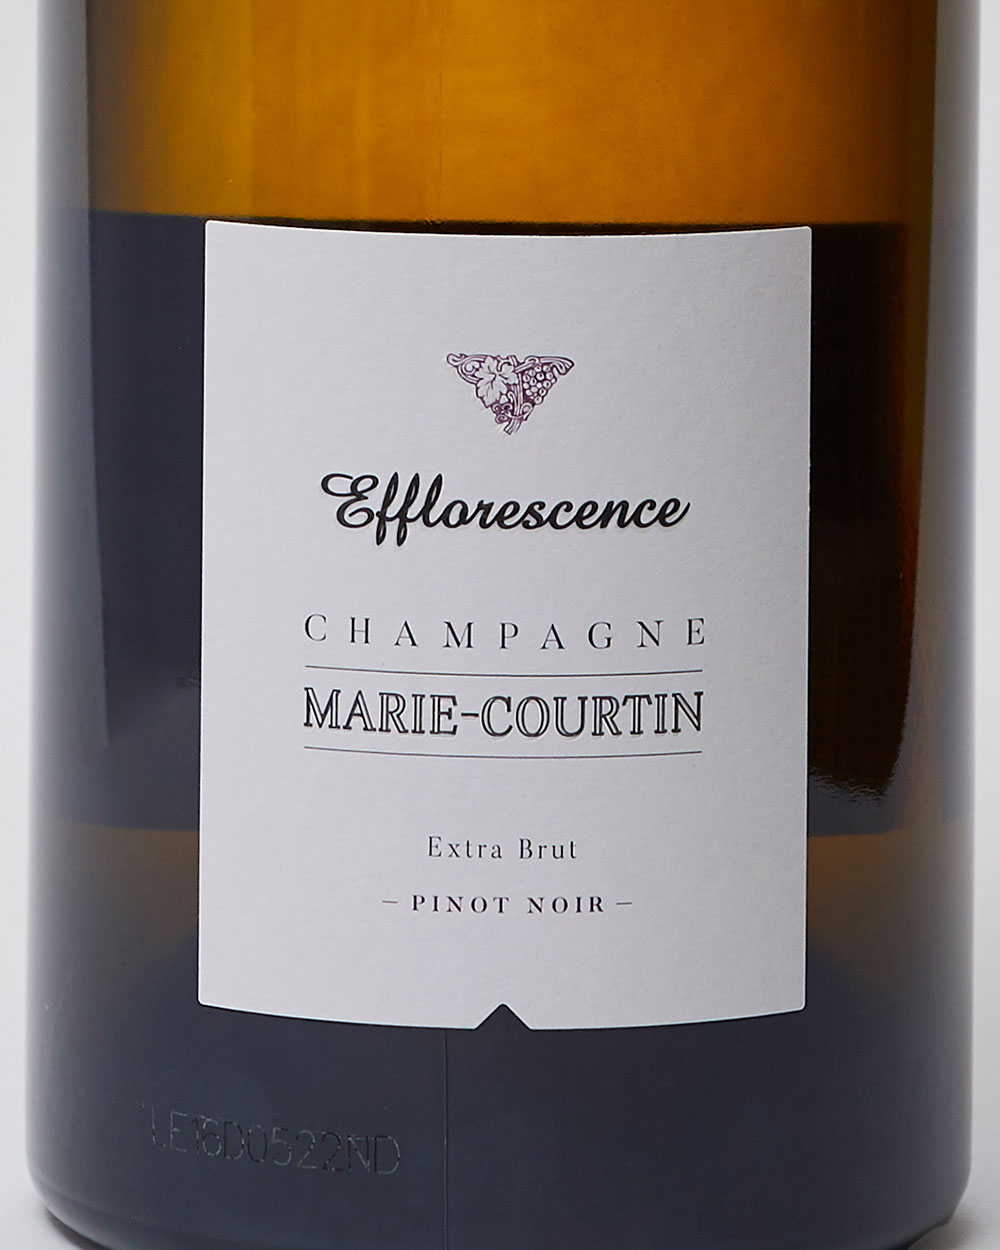 Efflorescence Champagne Marie-Courtin Pinot Noir label